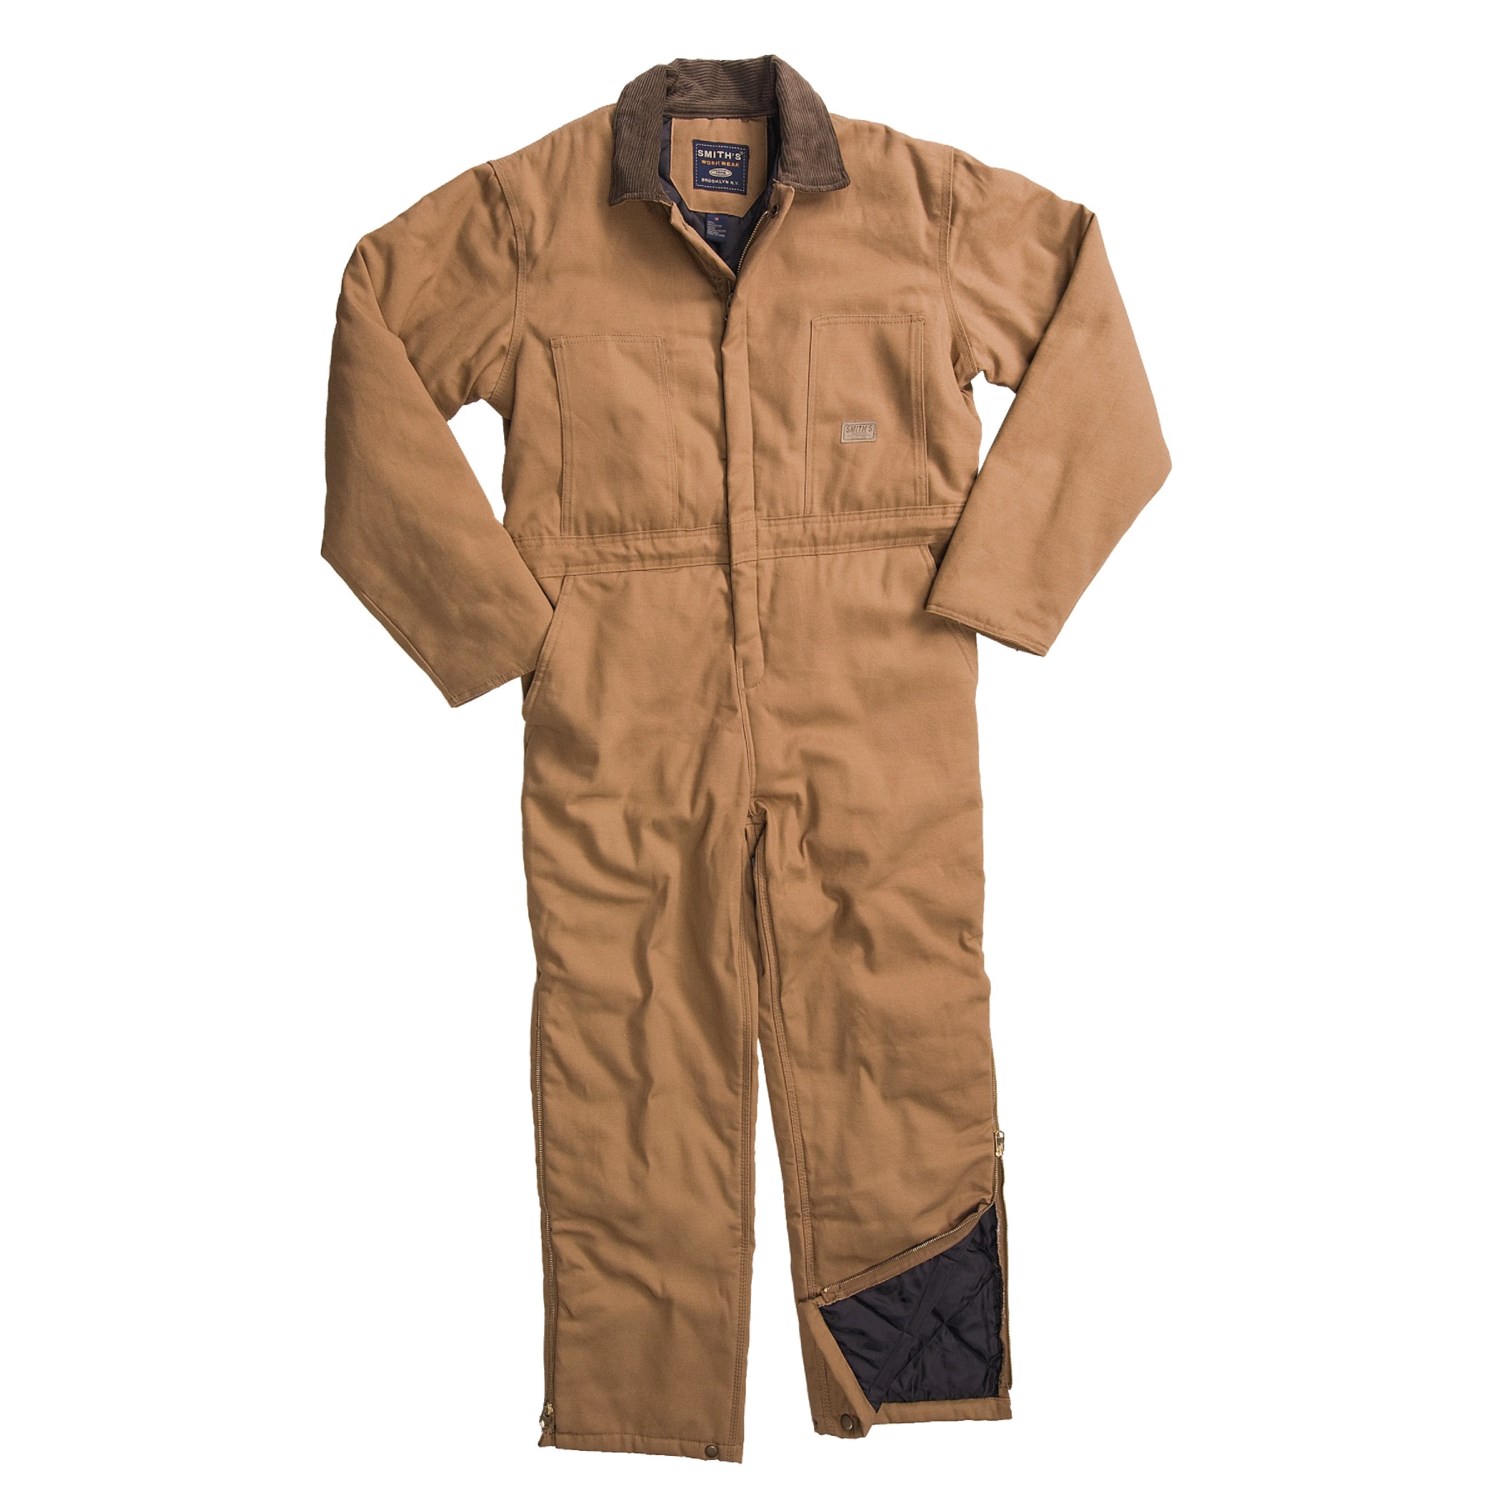 Smith's American Quilt-Lined Canvas Coveralls (For Men) 2913K - Save 60%